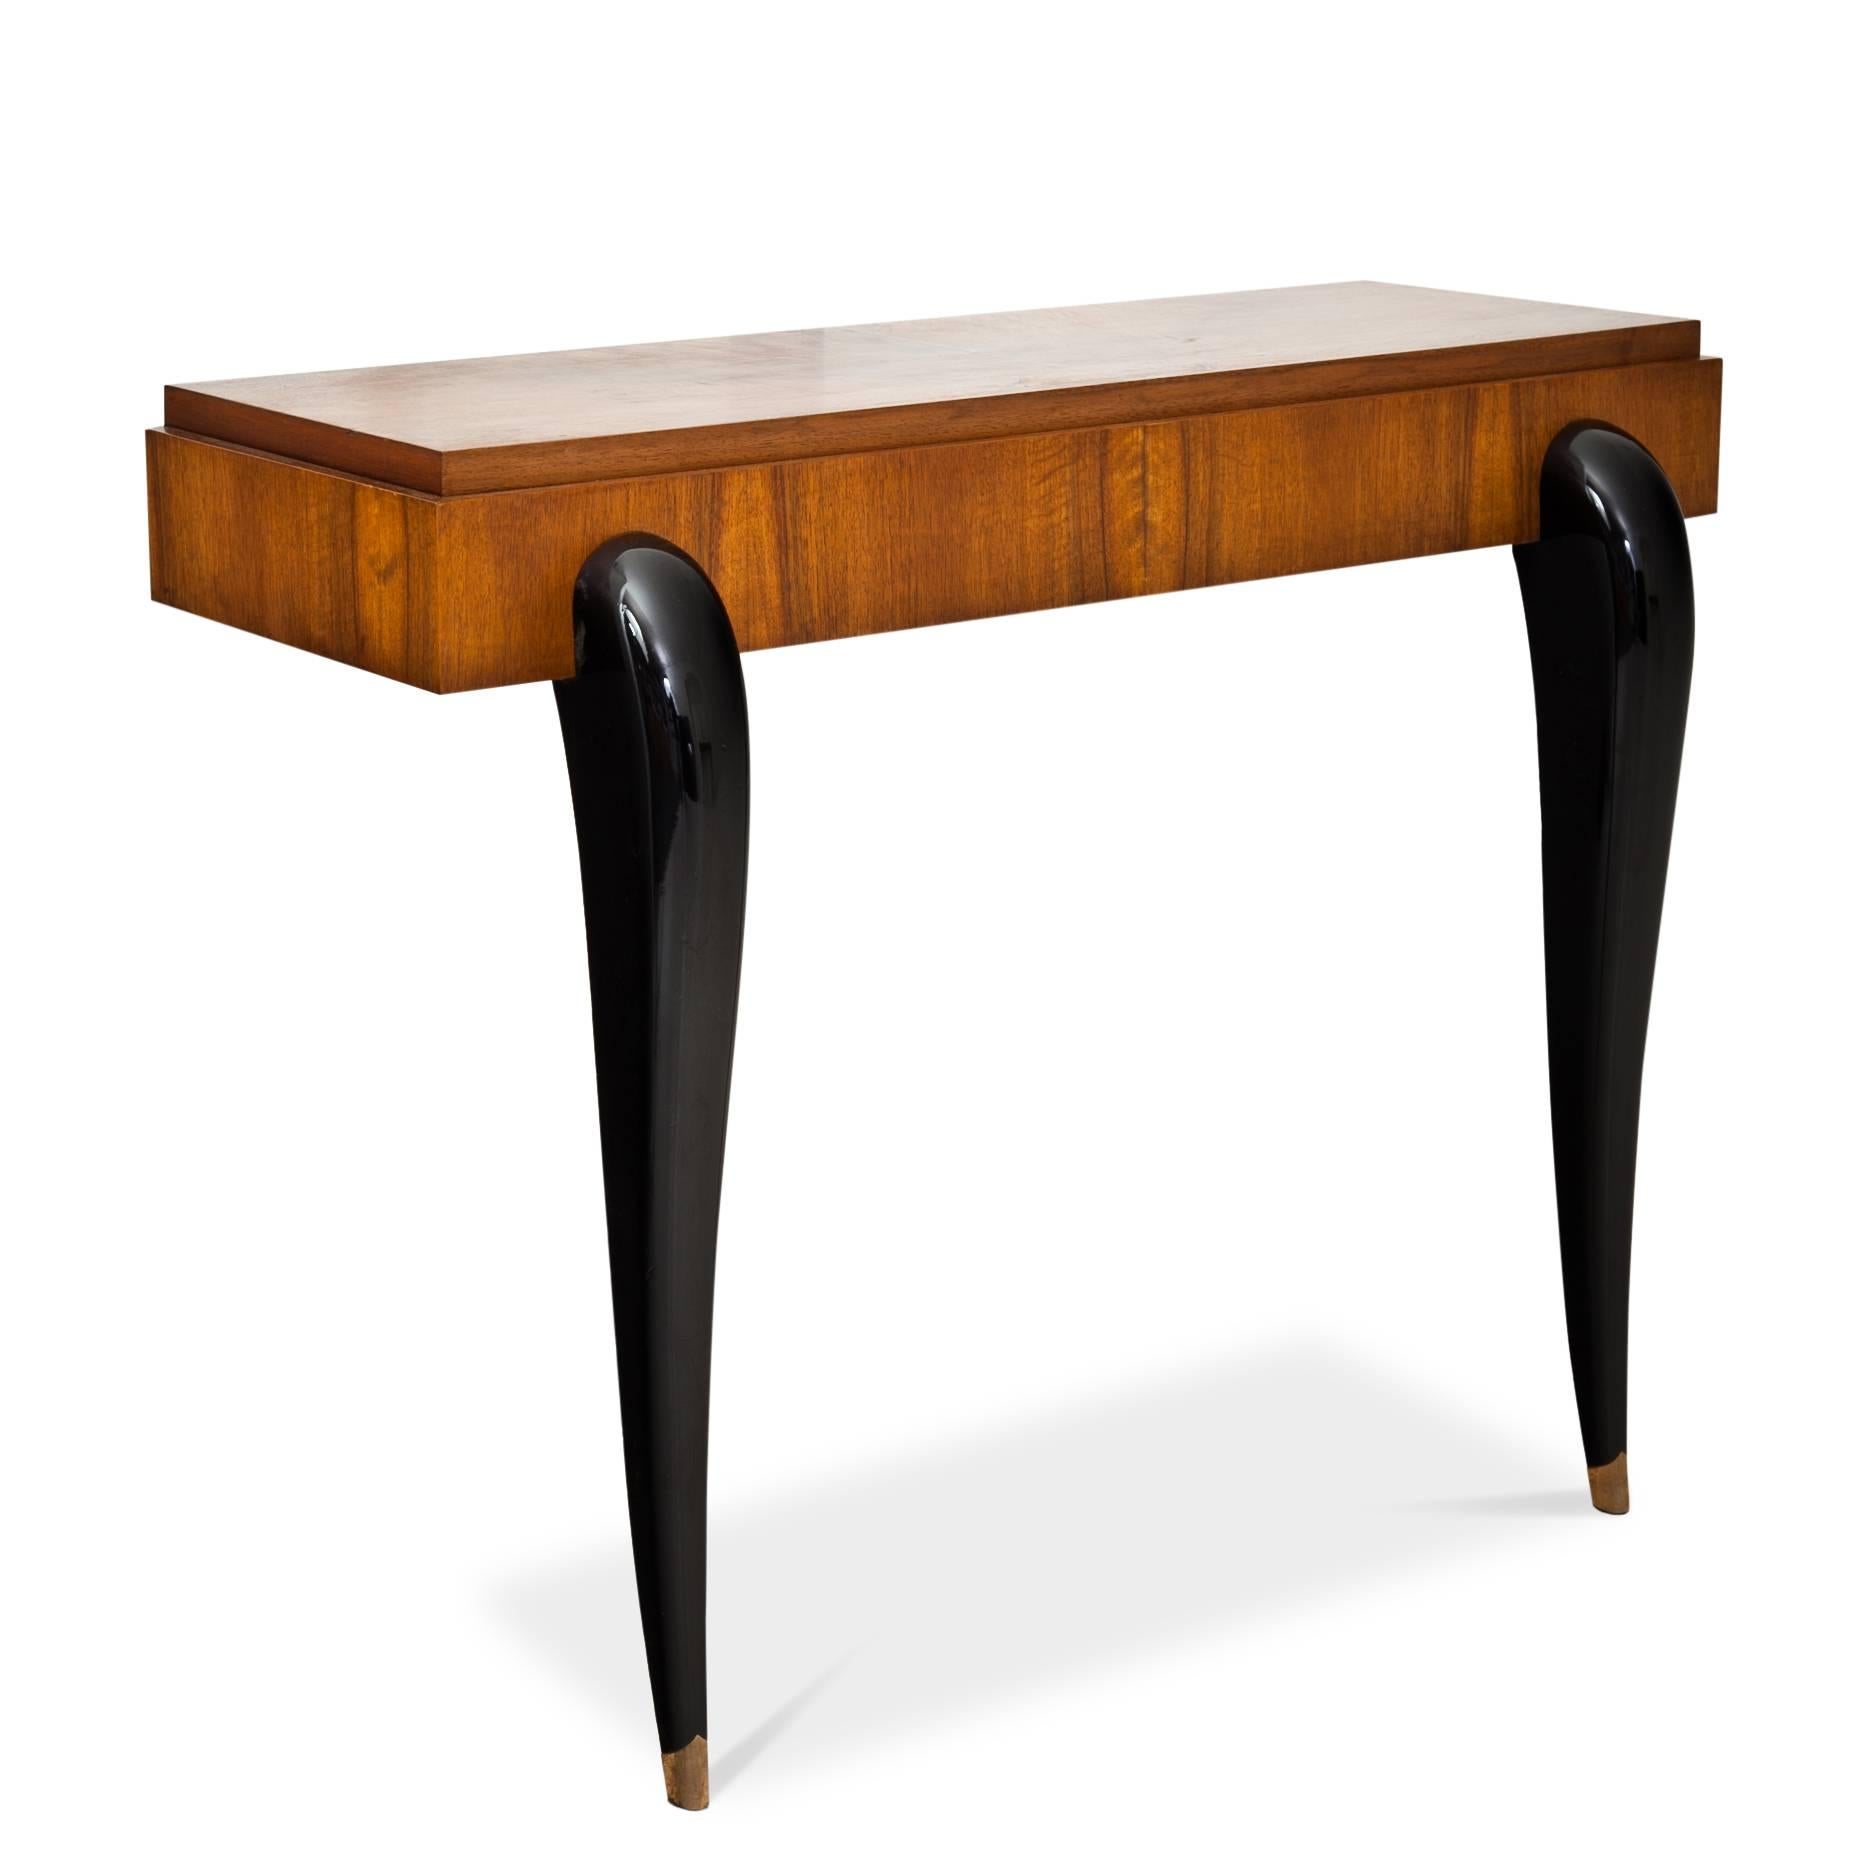 Pair of Art Deco-style console tables with elegant curved, ebonized legs and rectangular tops. The consoles were redesigned under use of old parts.